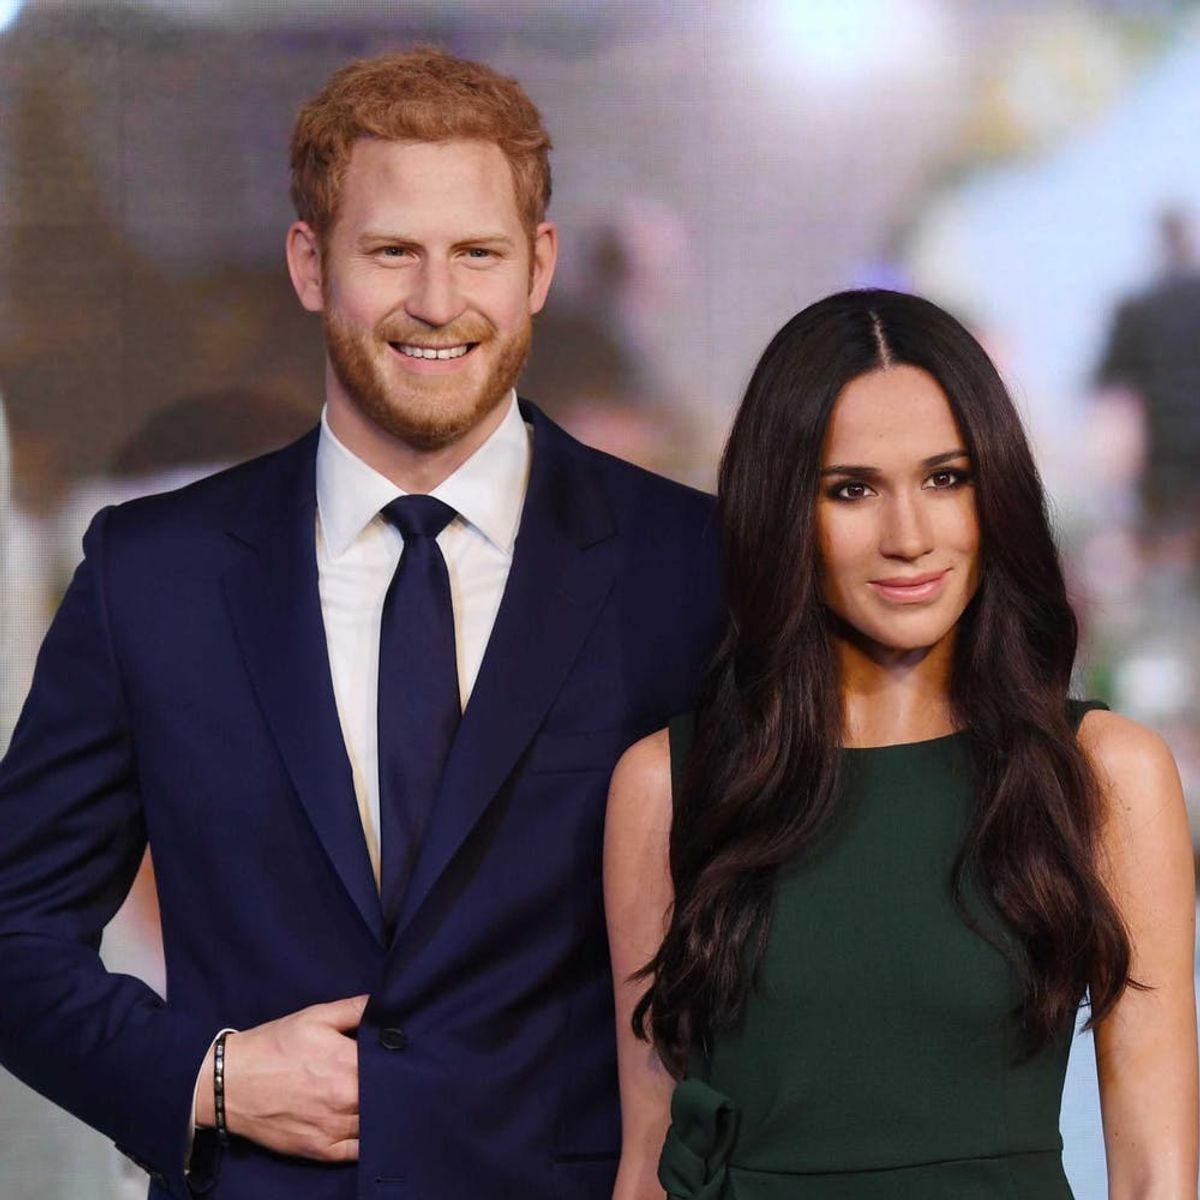 Meghan Markle’s Wax Figure Debuts at Madame Tussauds Before the Royal Wedding